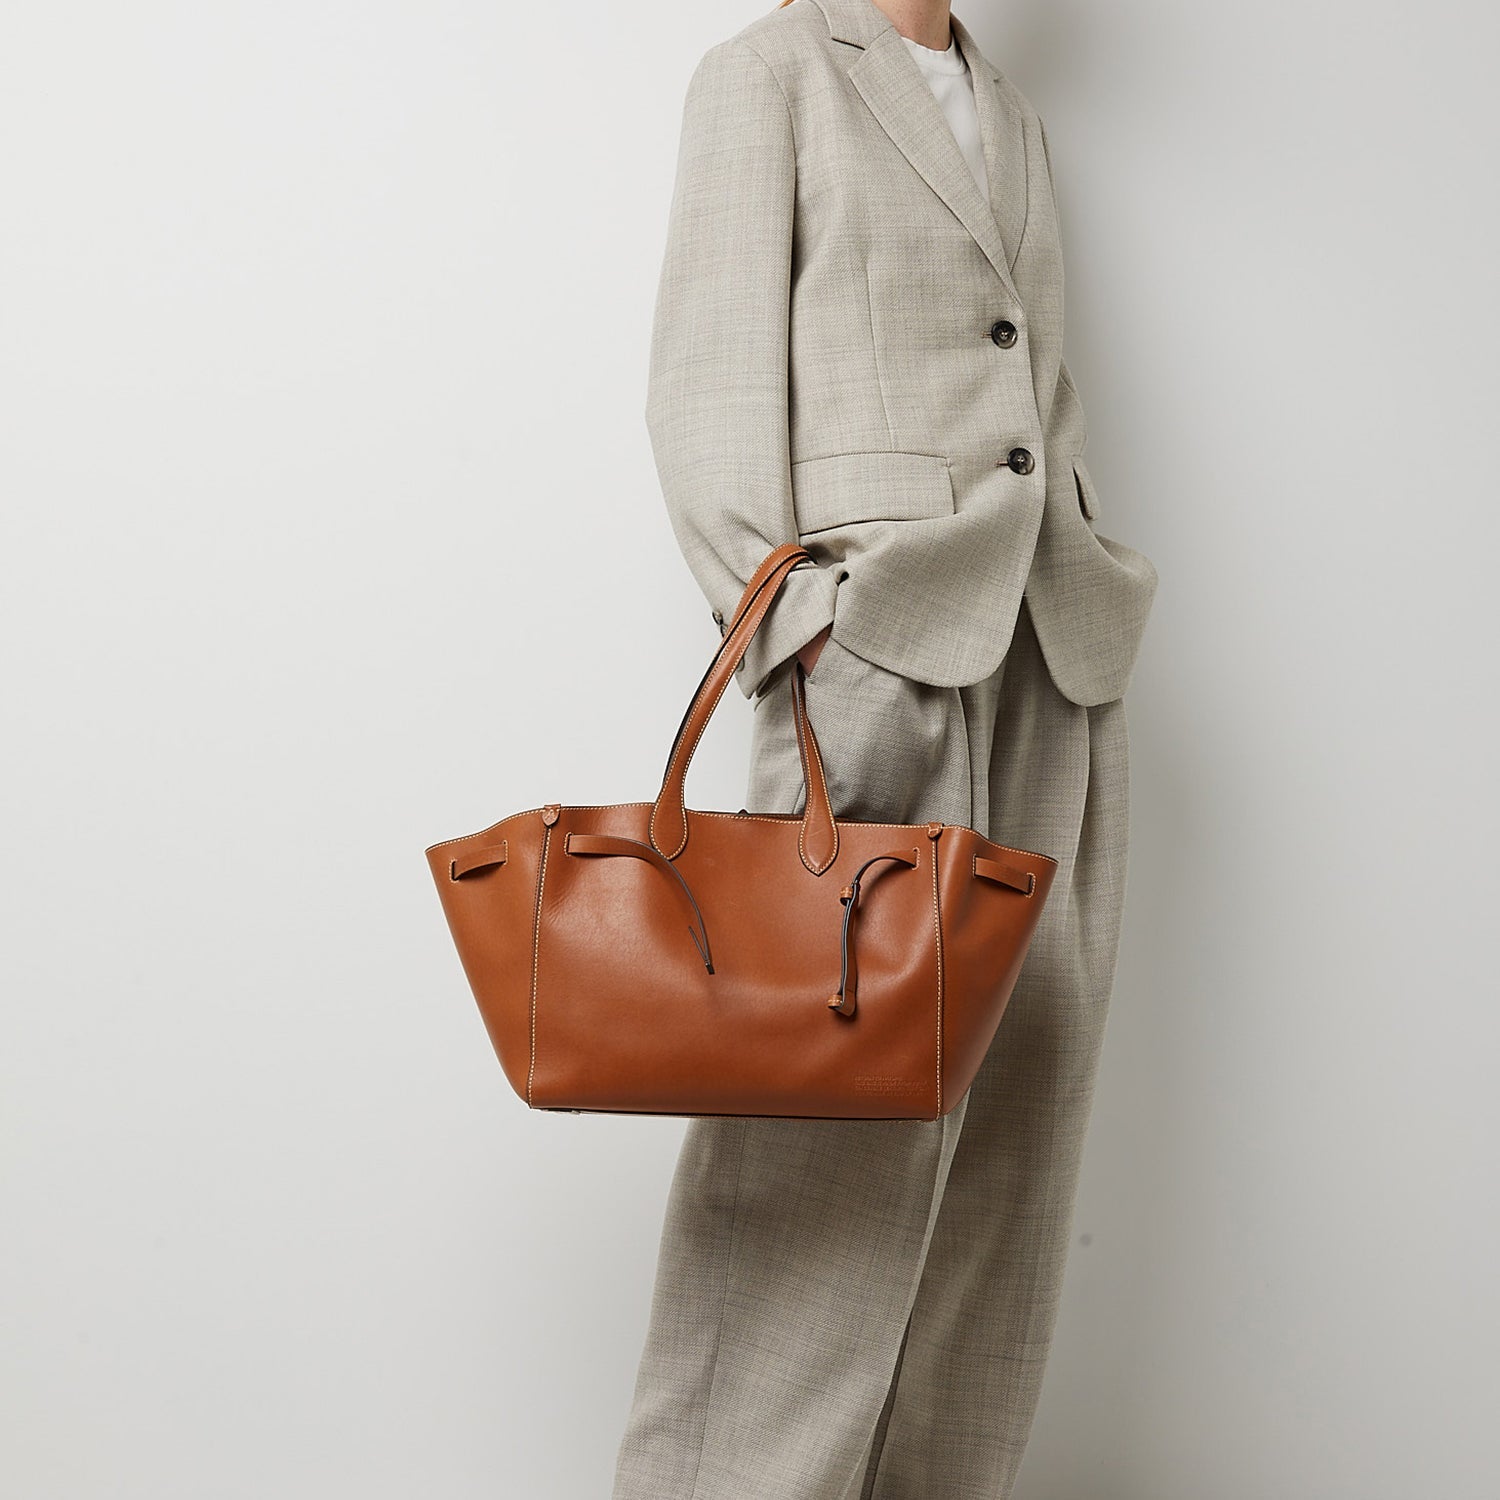 Return to Nature Tote -

                  
                    Compostable Leather in Tan -
                  

                  Anya Hindmarch US
